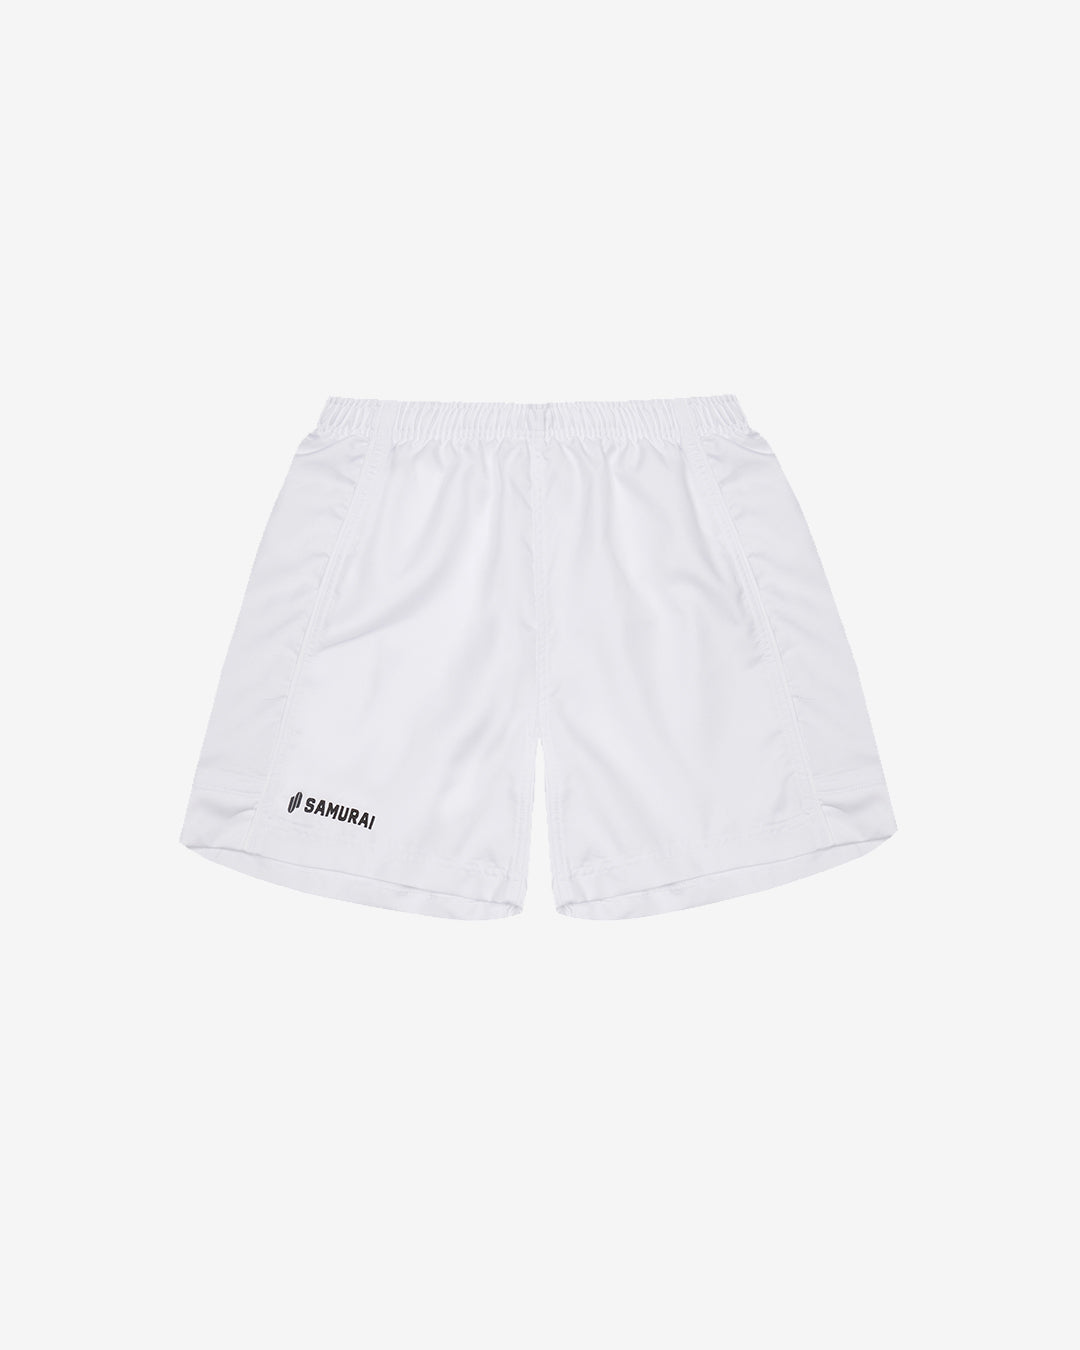 EP:0119 - Rugby Shorts - White